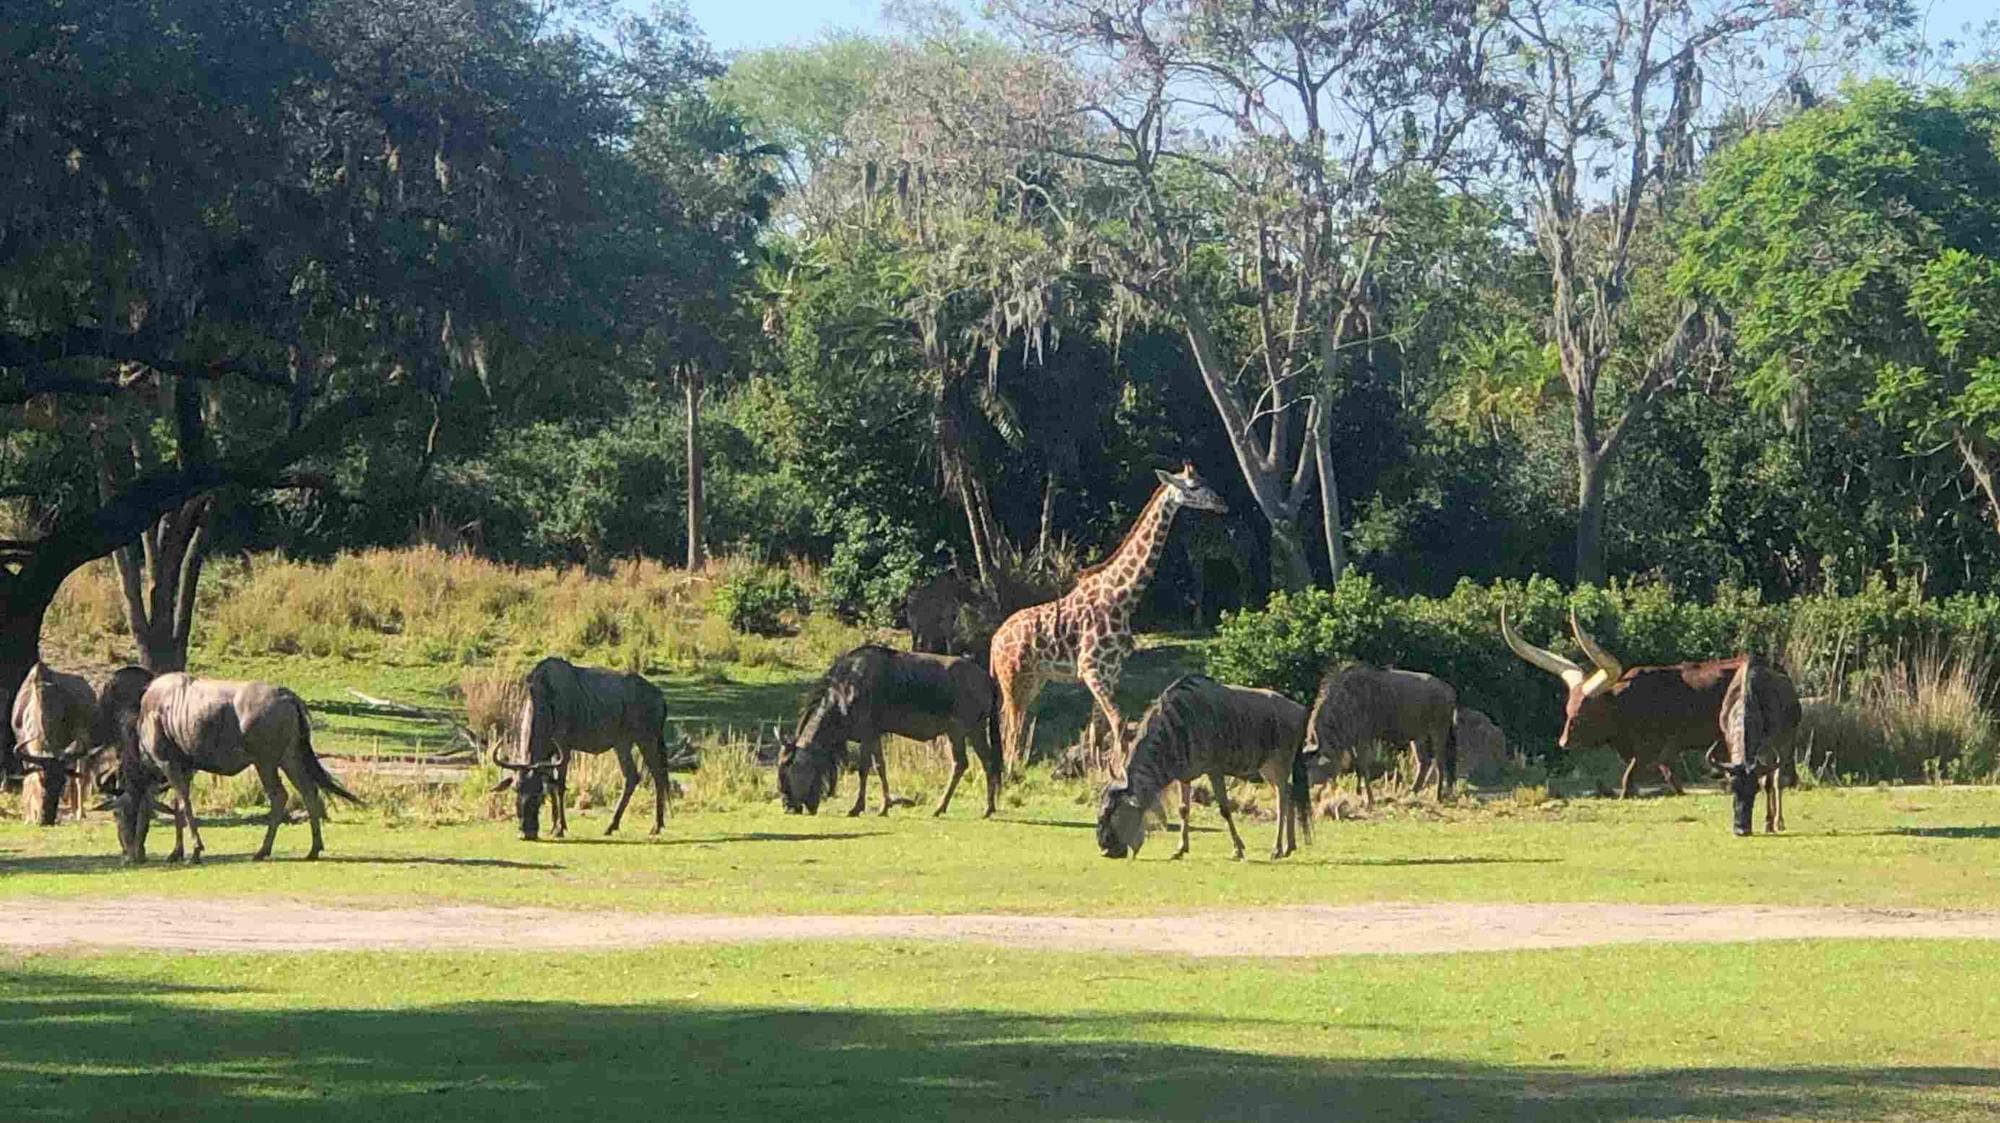 Giraffe and other animals seen on Kilimanjaro Safaris at Disney's Animal Kingdom that you can see on Earth Day